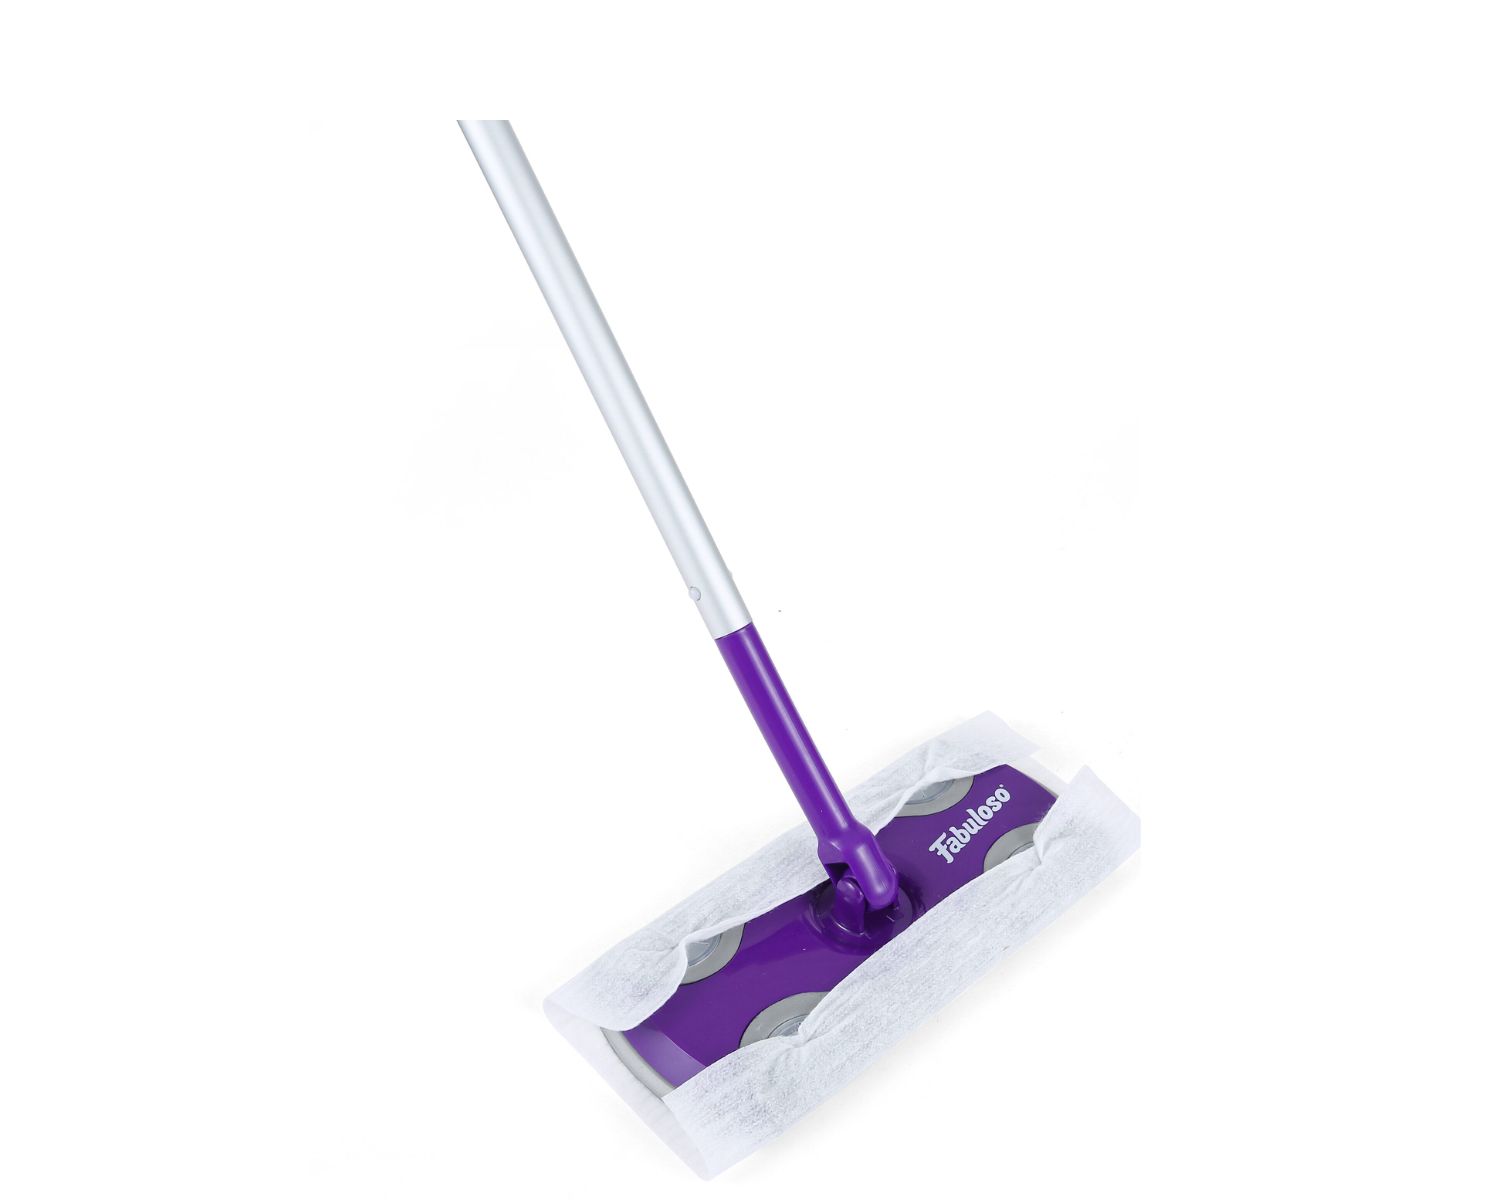 How To Use Fabuloso To Mop Floors